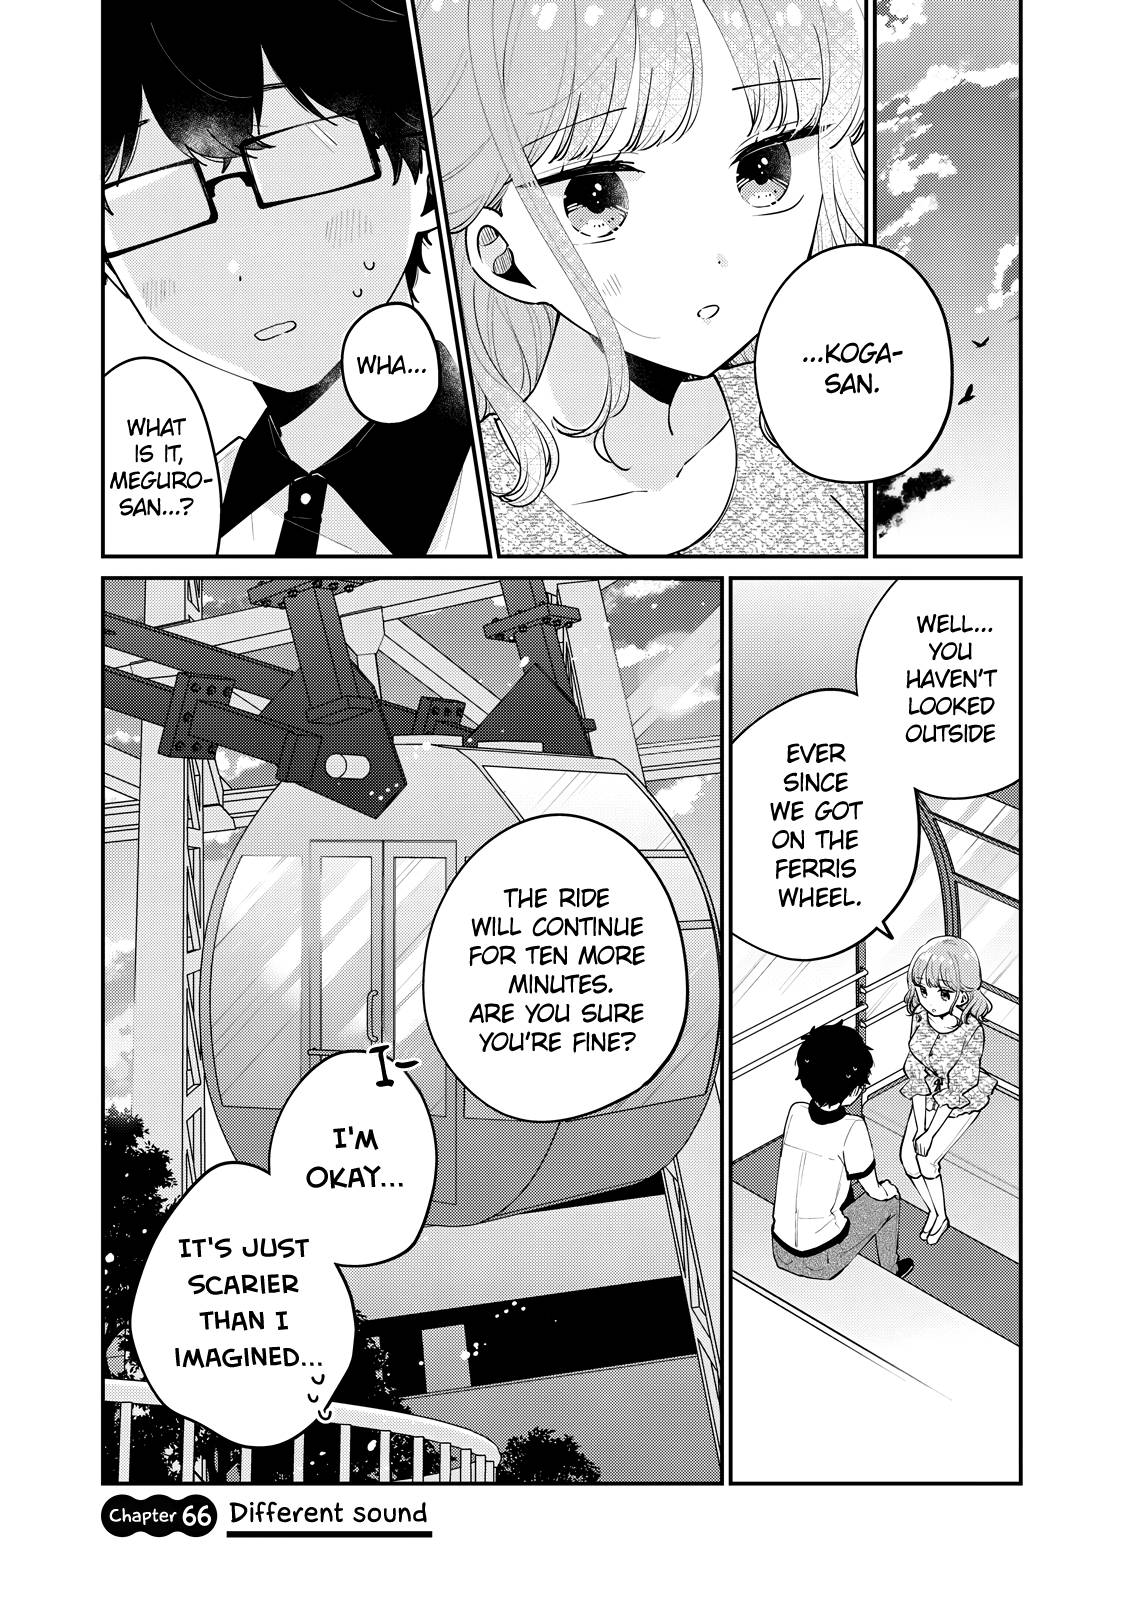 It's Not Meguro-san's First Time chapter 66 page 2